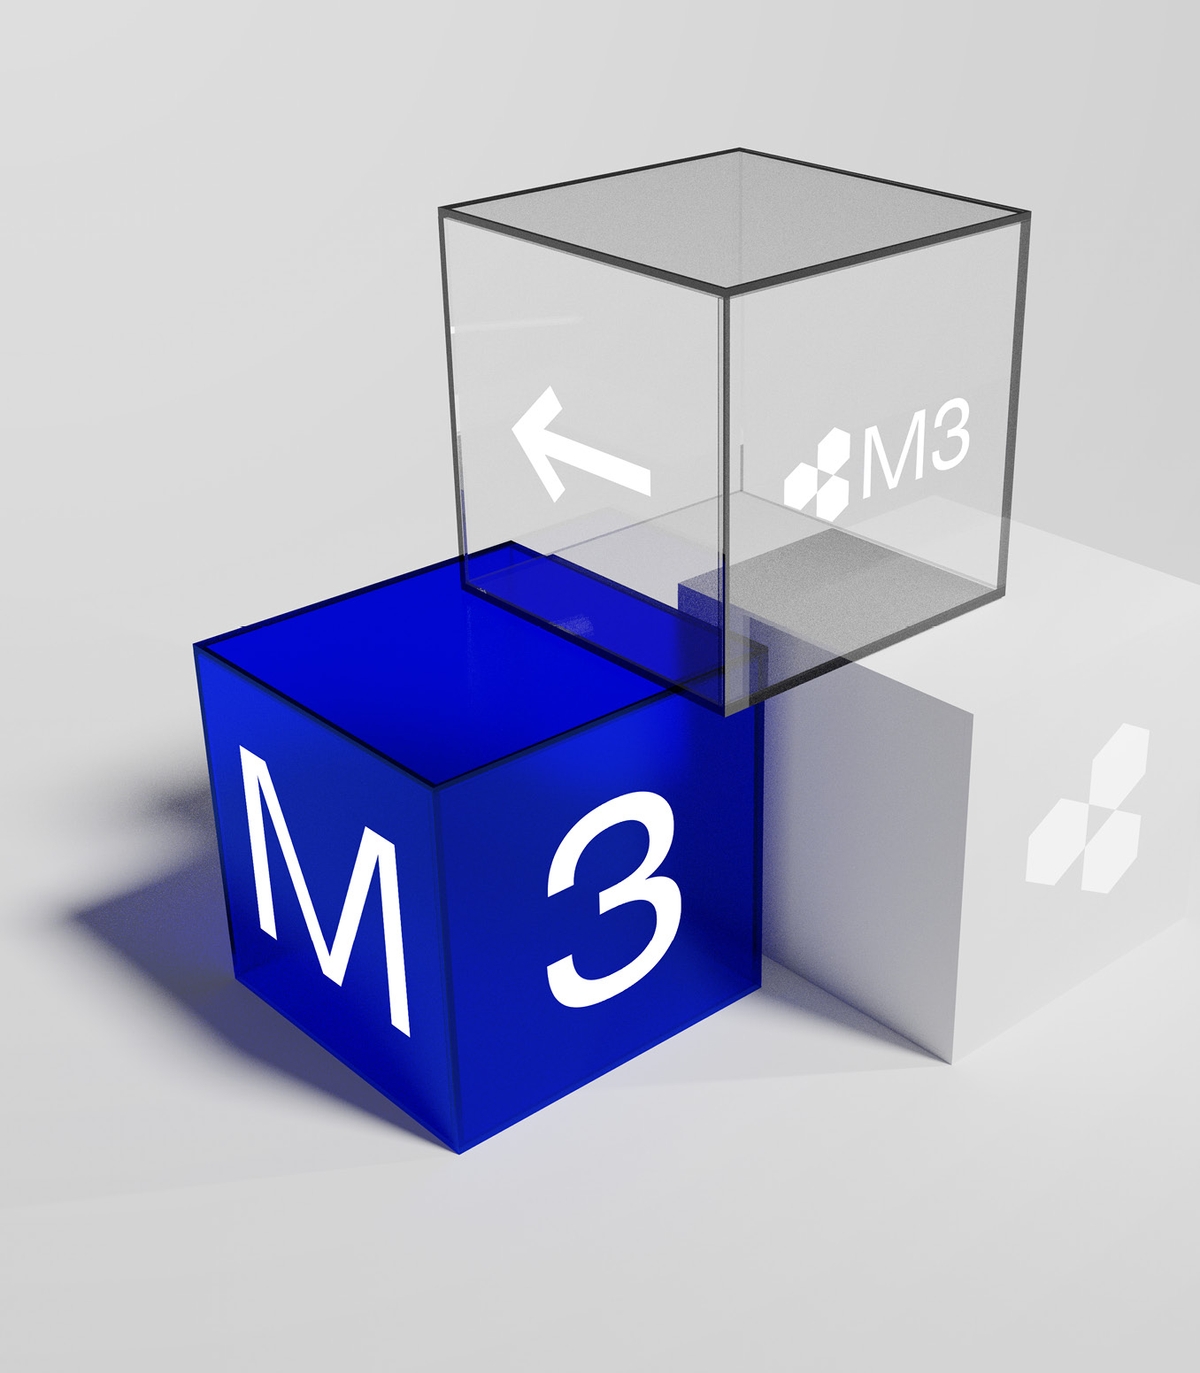 M3 Property - Brand and Website - 3d Rendered Squares Logos | Atollon - a design company